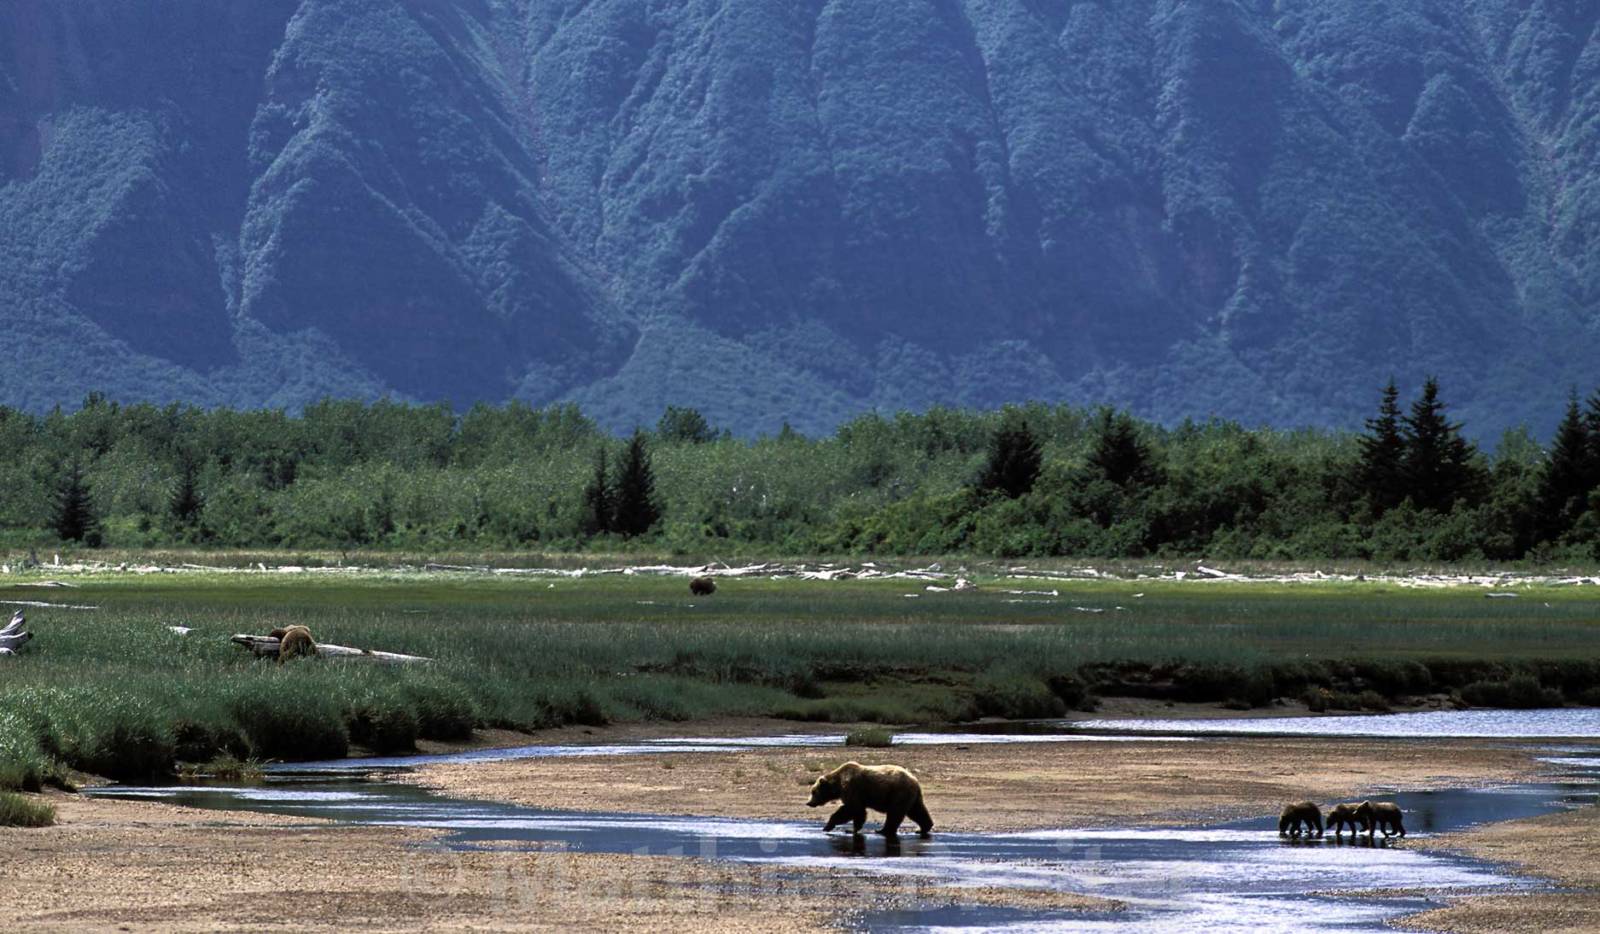 Welcome to the first installment of Alaska Ultimate Safaris web blog. We are committed to providing guided safaris to remote areas of Alaska.